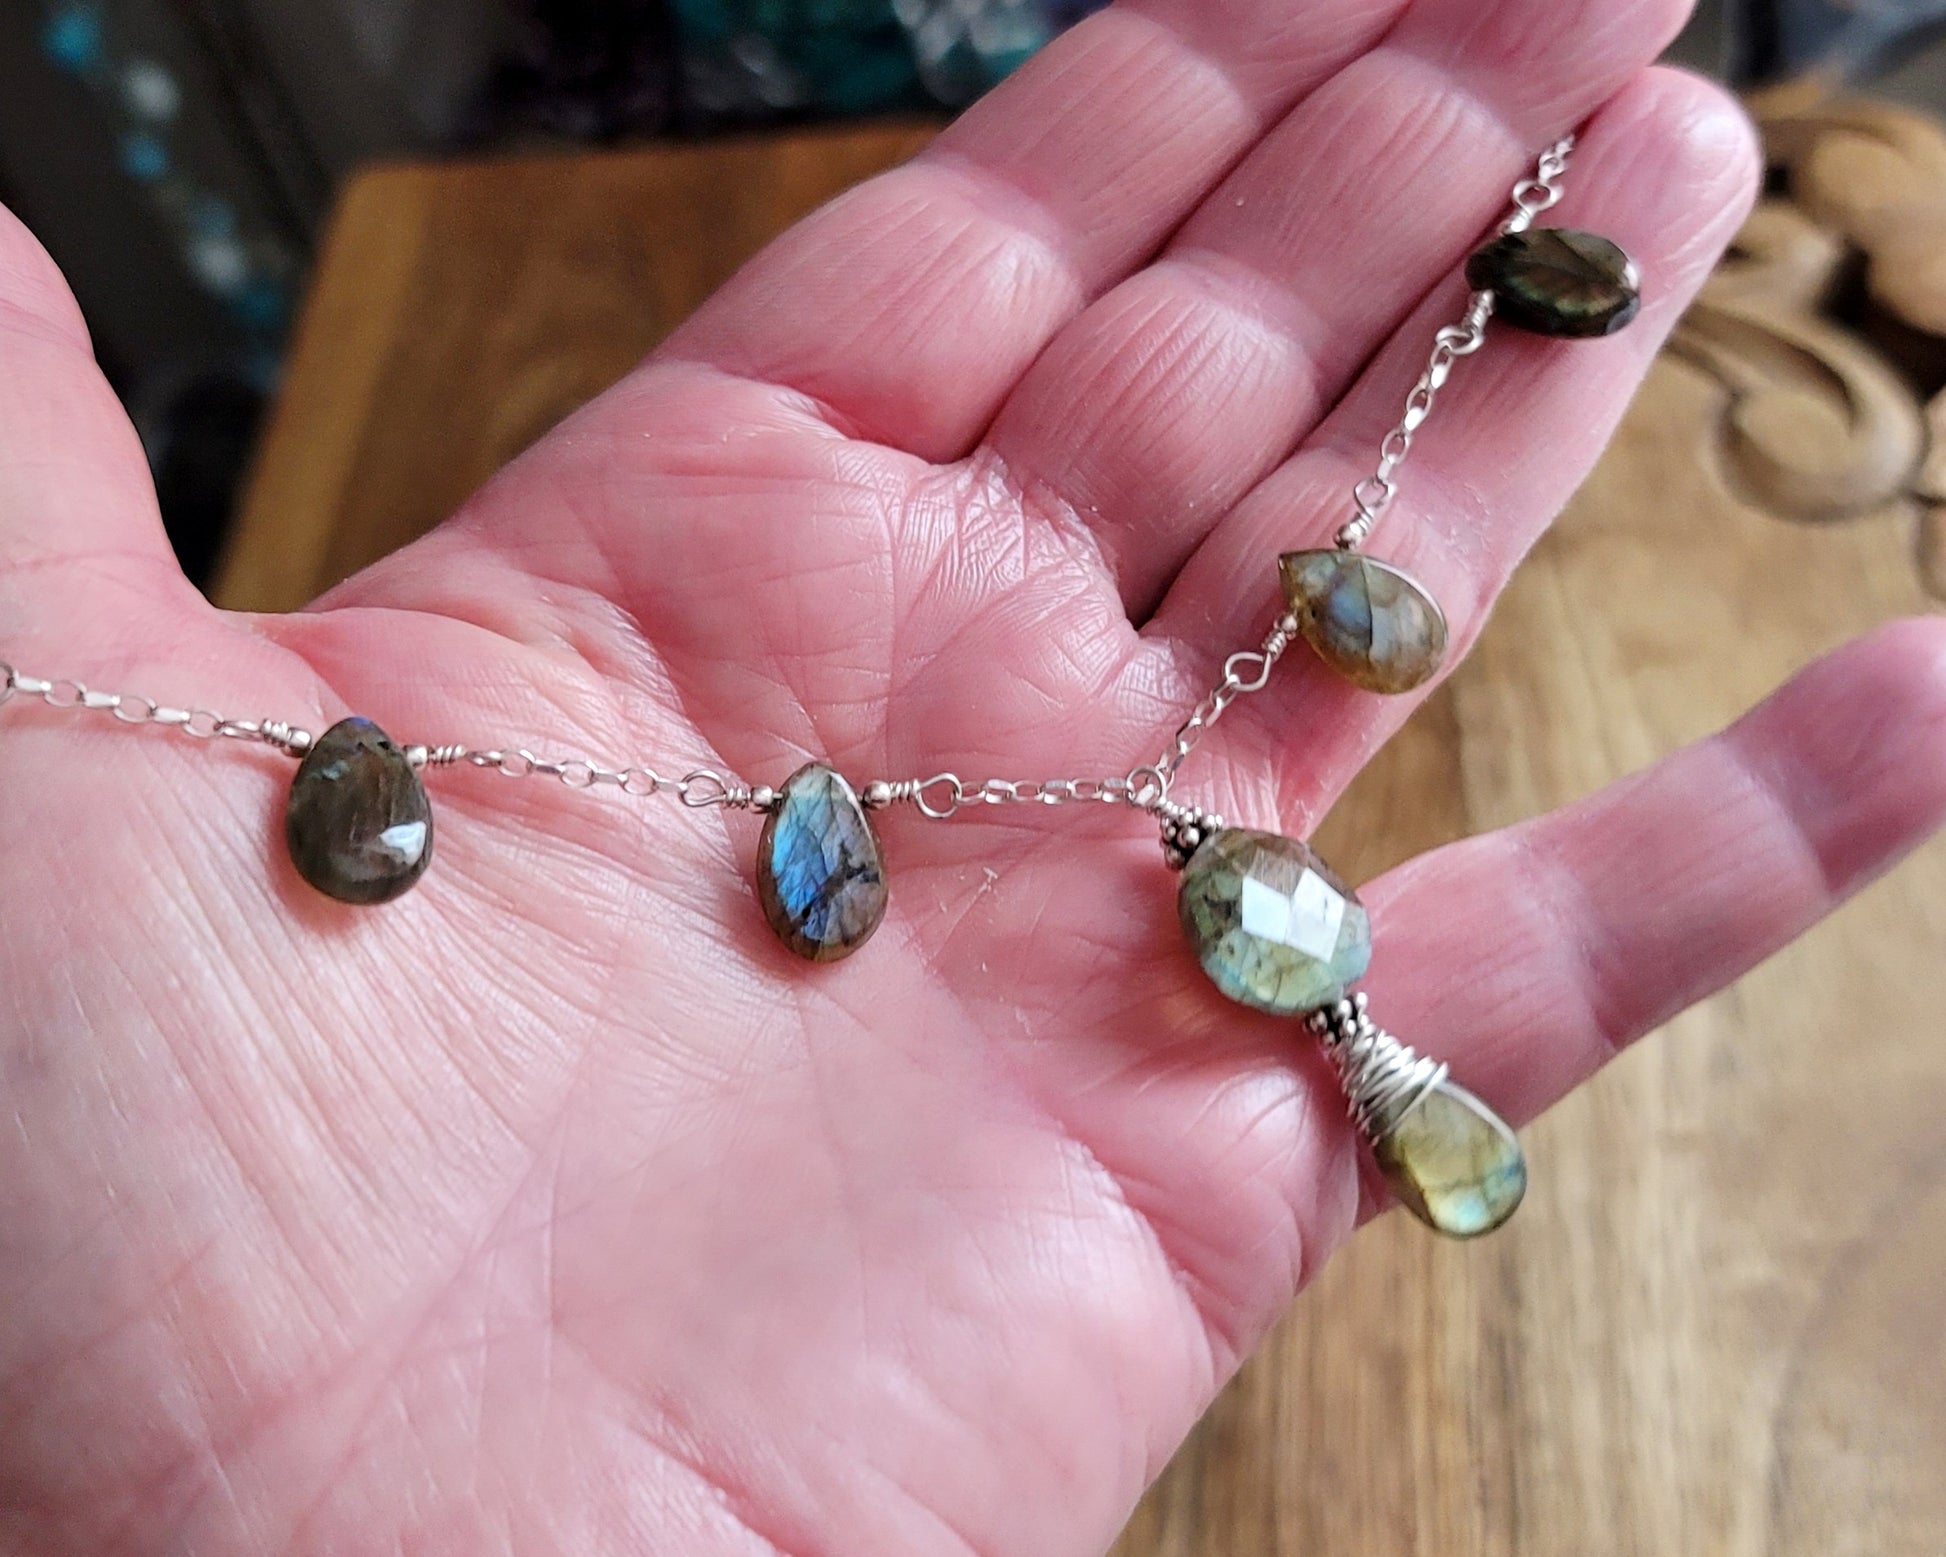 Light Dance Labradorite Necklace and Earring Set. Art Deco Style Sterling Silver Labradorite Necklace  in hand